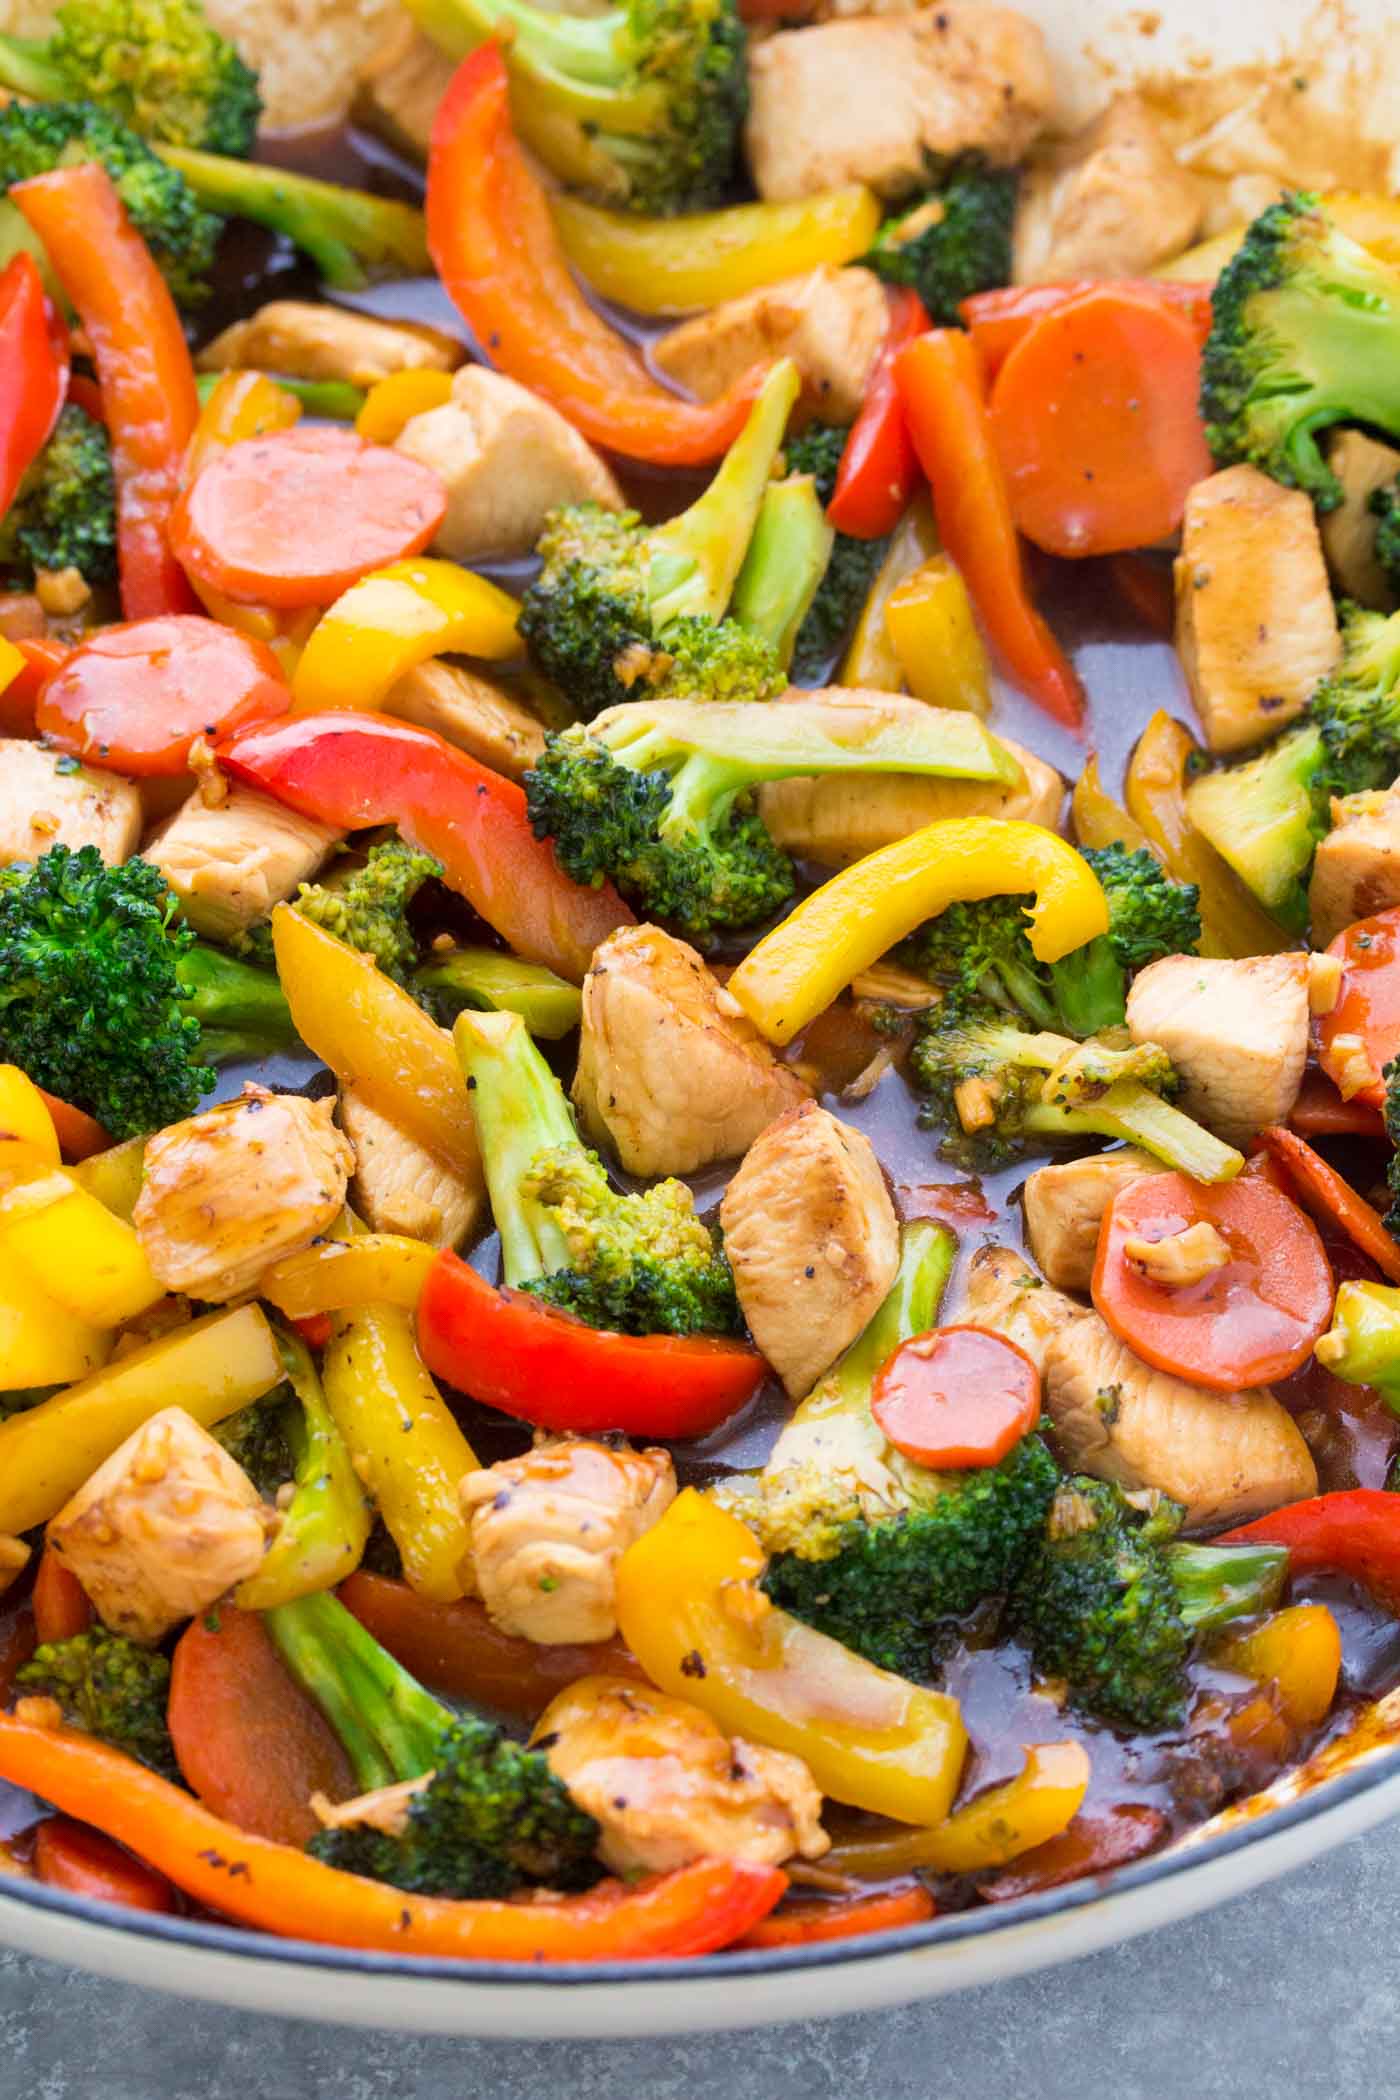 Chicken and broccoli stir fry in a skillet.